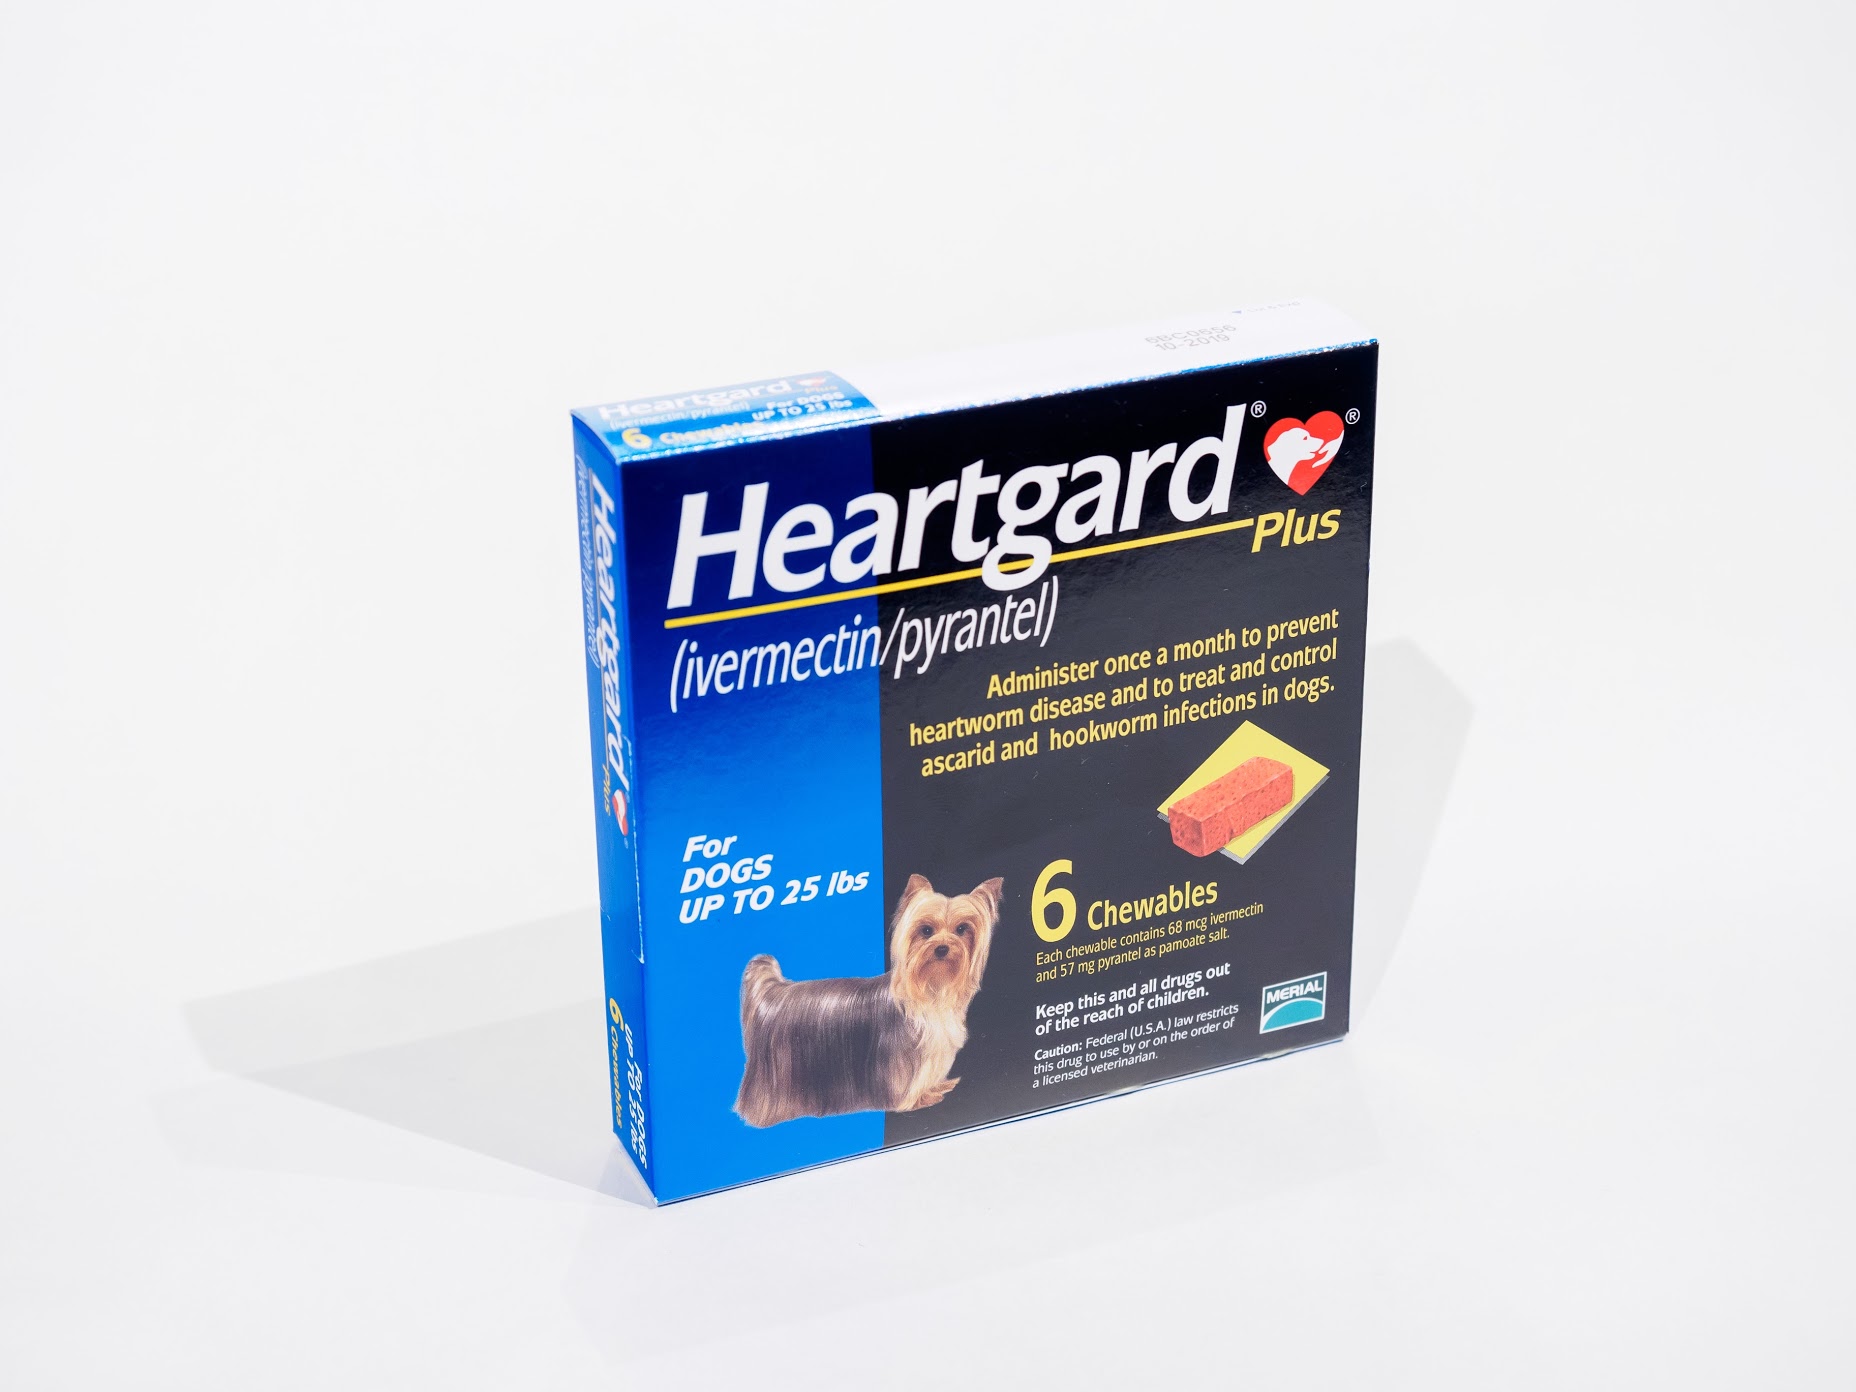 heartgard-plus-for-dogs-26-50-lbs-1-chew-lupon-gov-ph